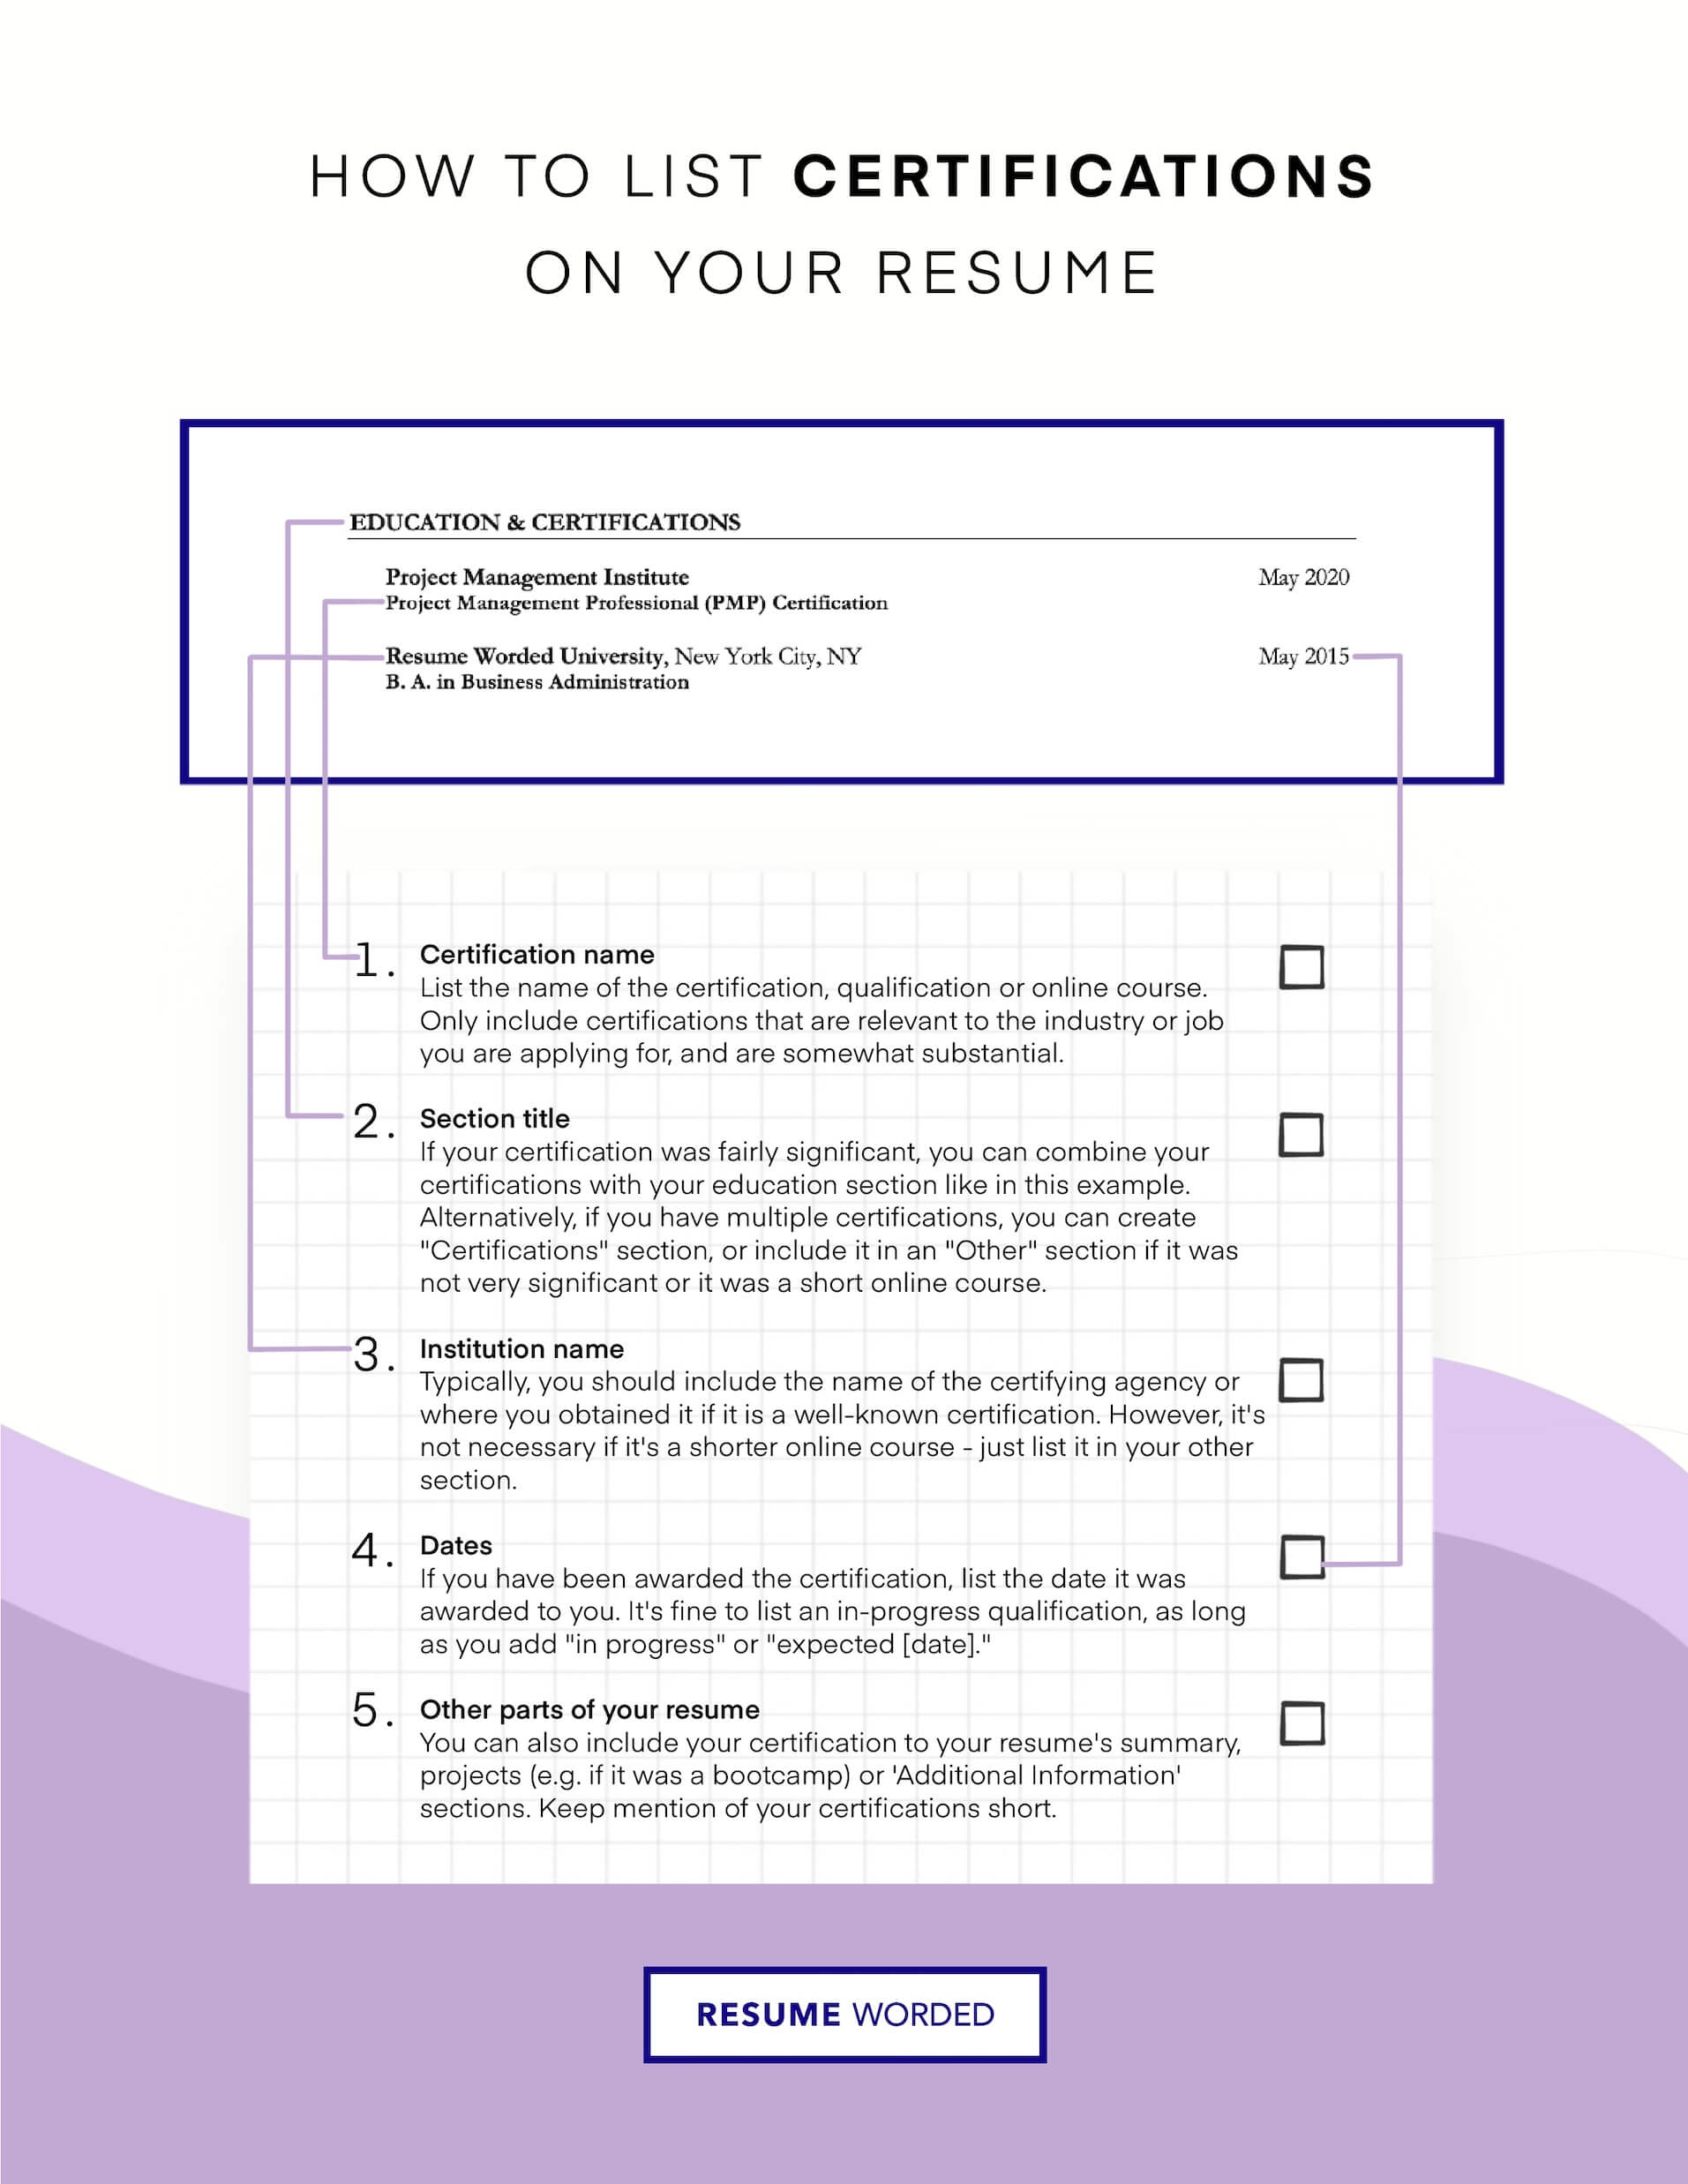 Highlight your technical skills and certifications - Senior Director of Technology Resume